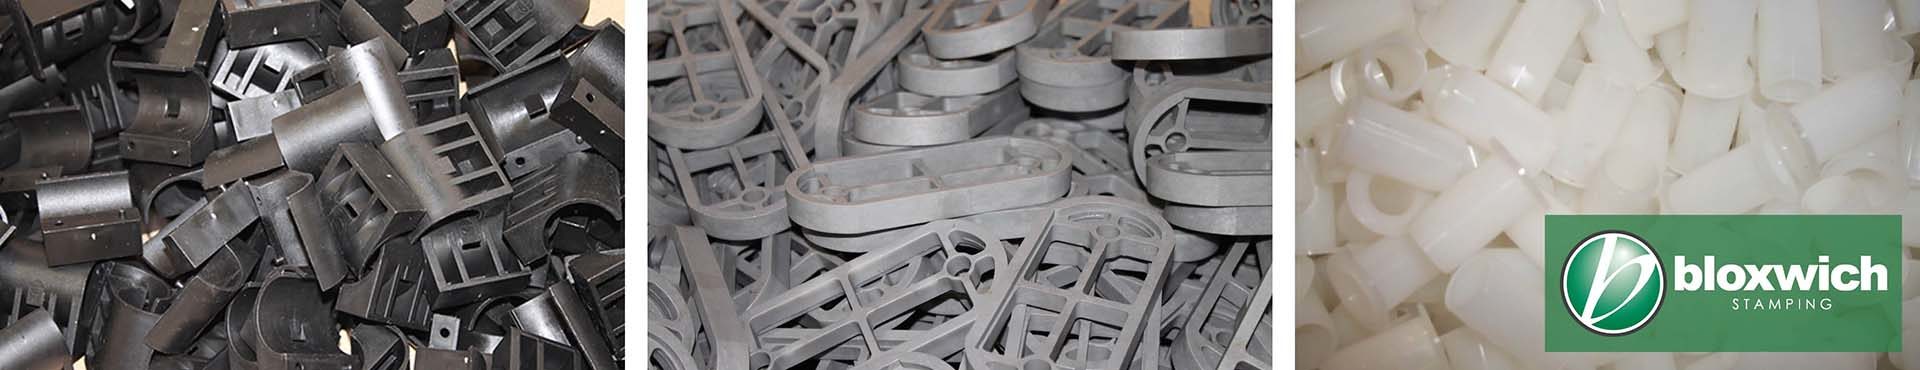 Bloxwich Stamping injection moulded parts